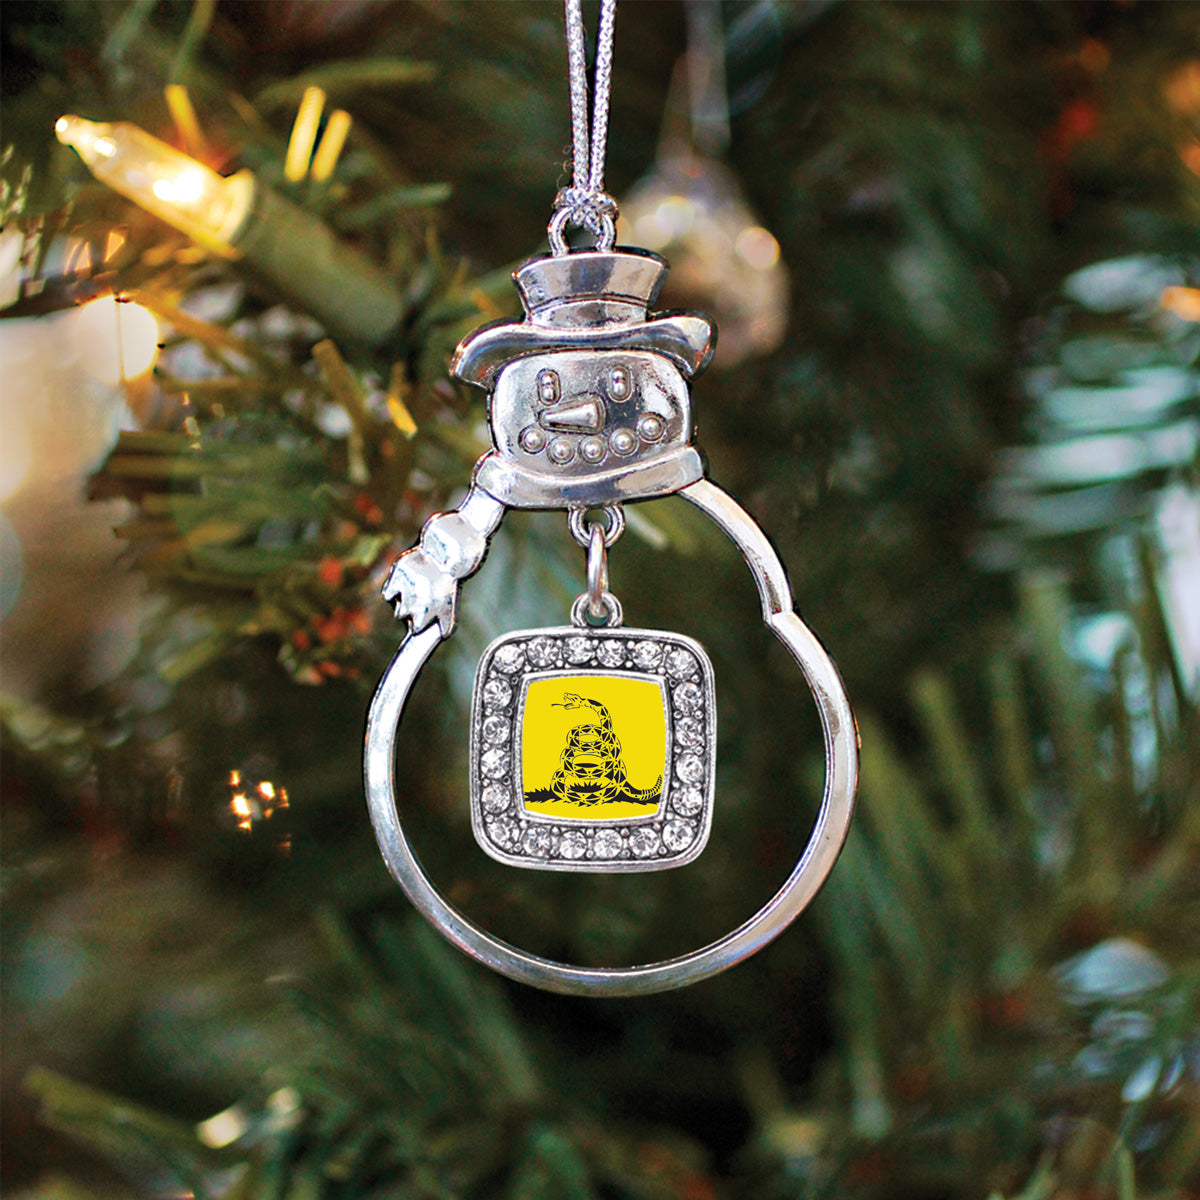 Don't Tread on Me Square Charm Christmas / Holiday Ornament